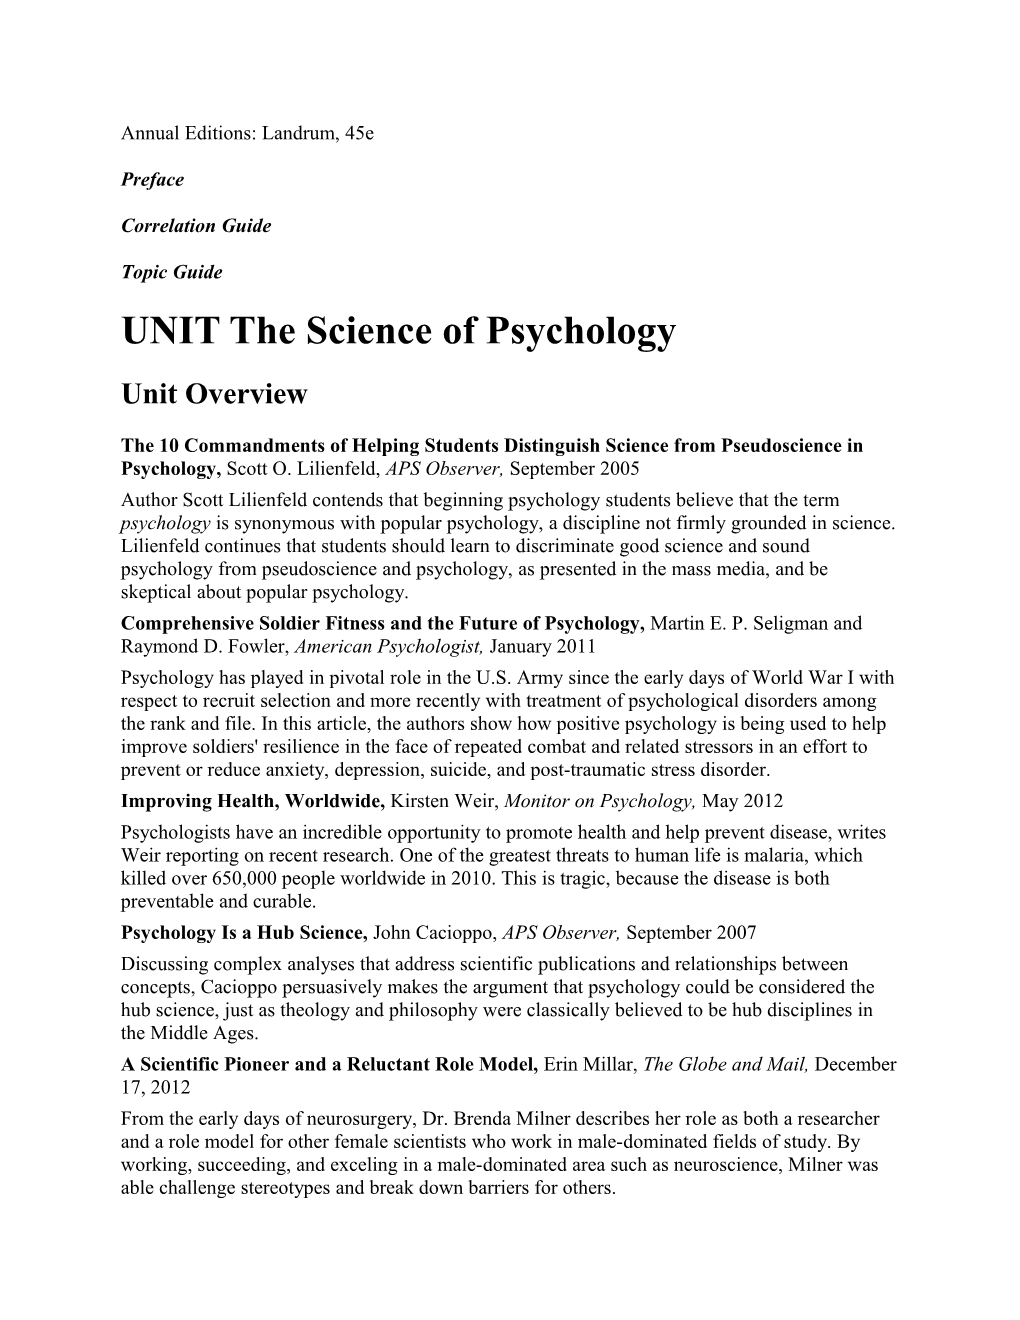 UNIT the Science of Psychology